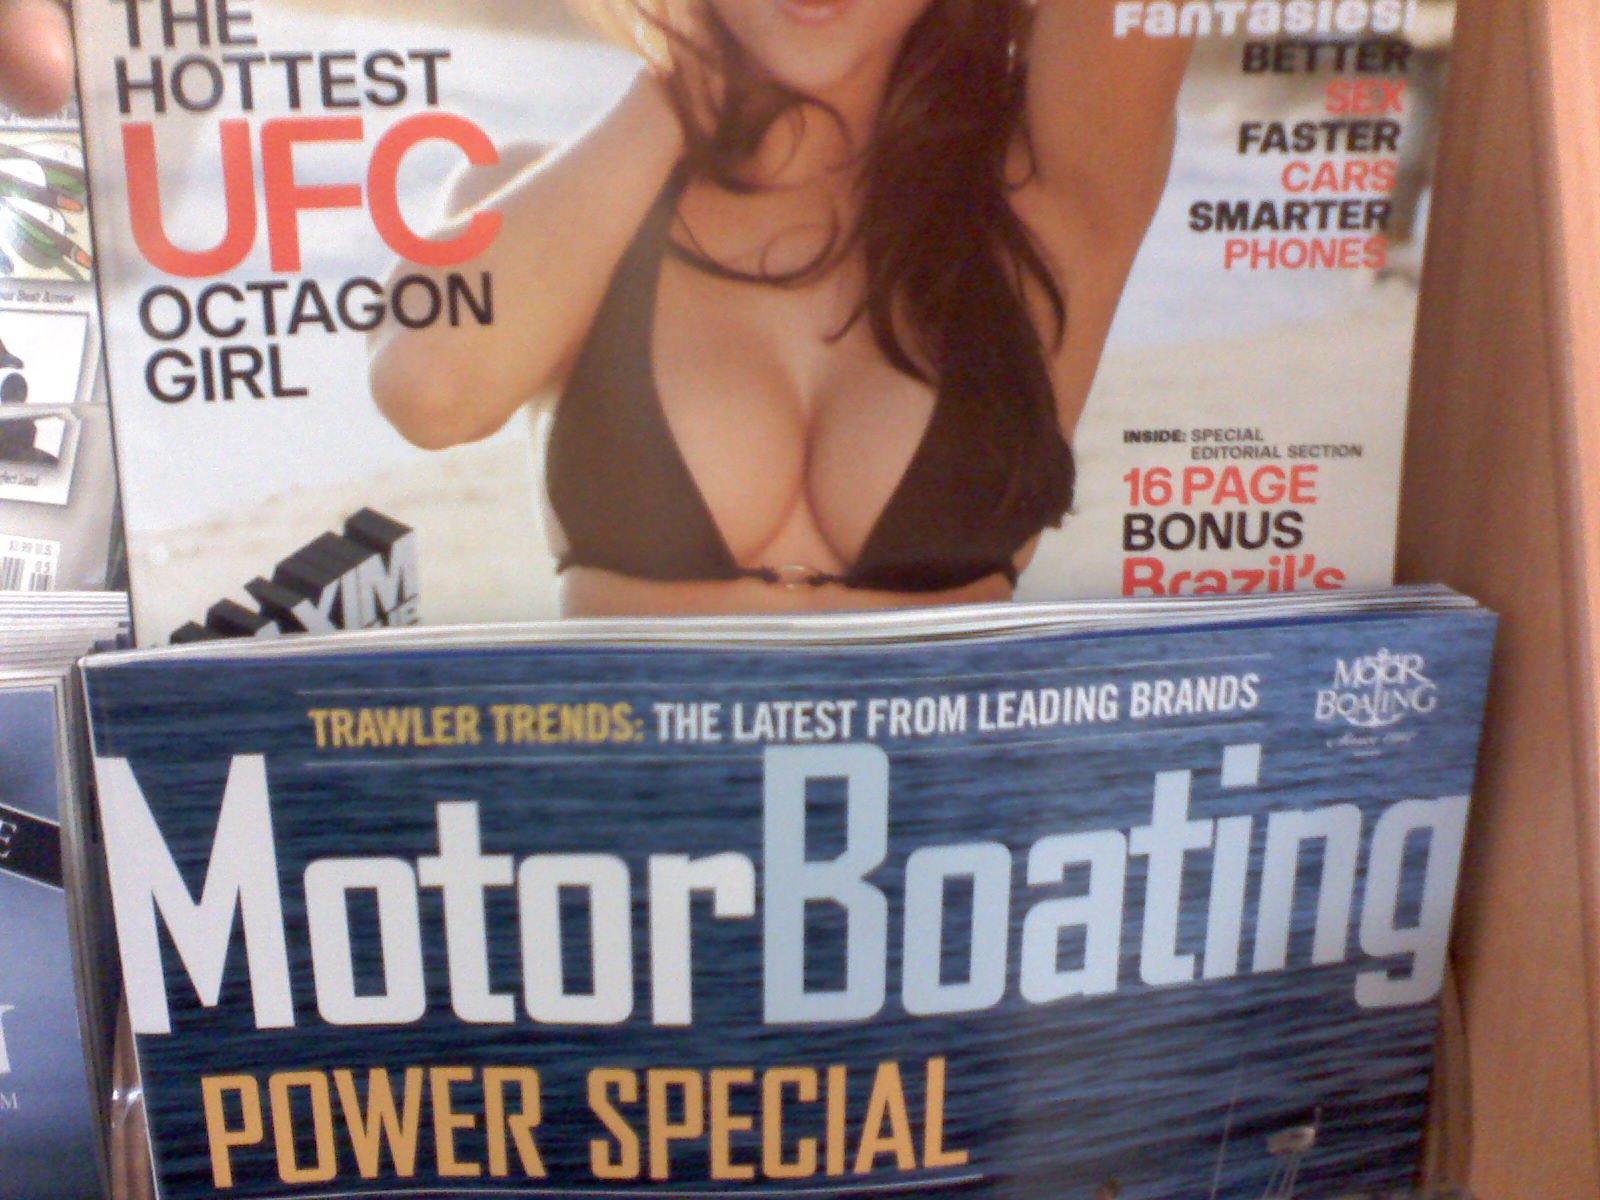 motorboating magazine boobs - The Hottest Fantasies Better Sufo Faster Cars Smarter Phones Octagon Girl Inside Special Editorial Section 16 Page Bonus Brazil's B Trawler Trends The Latest From Leading Brands MotorBoating 1 Power Special